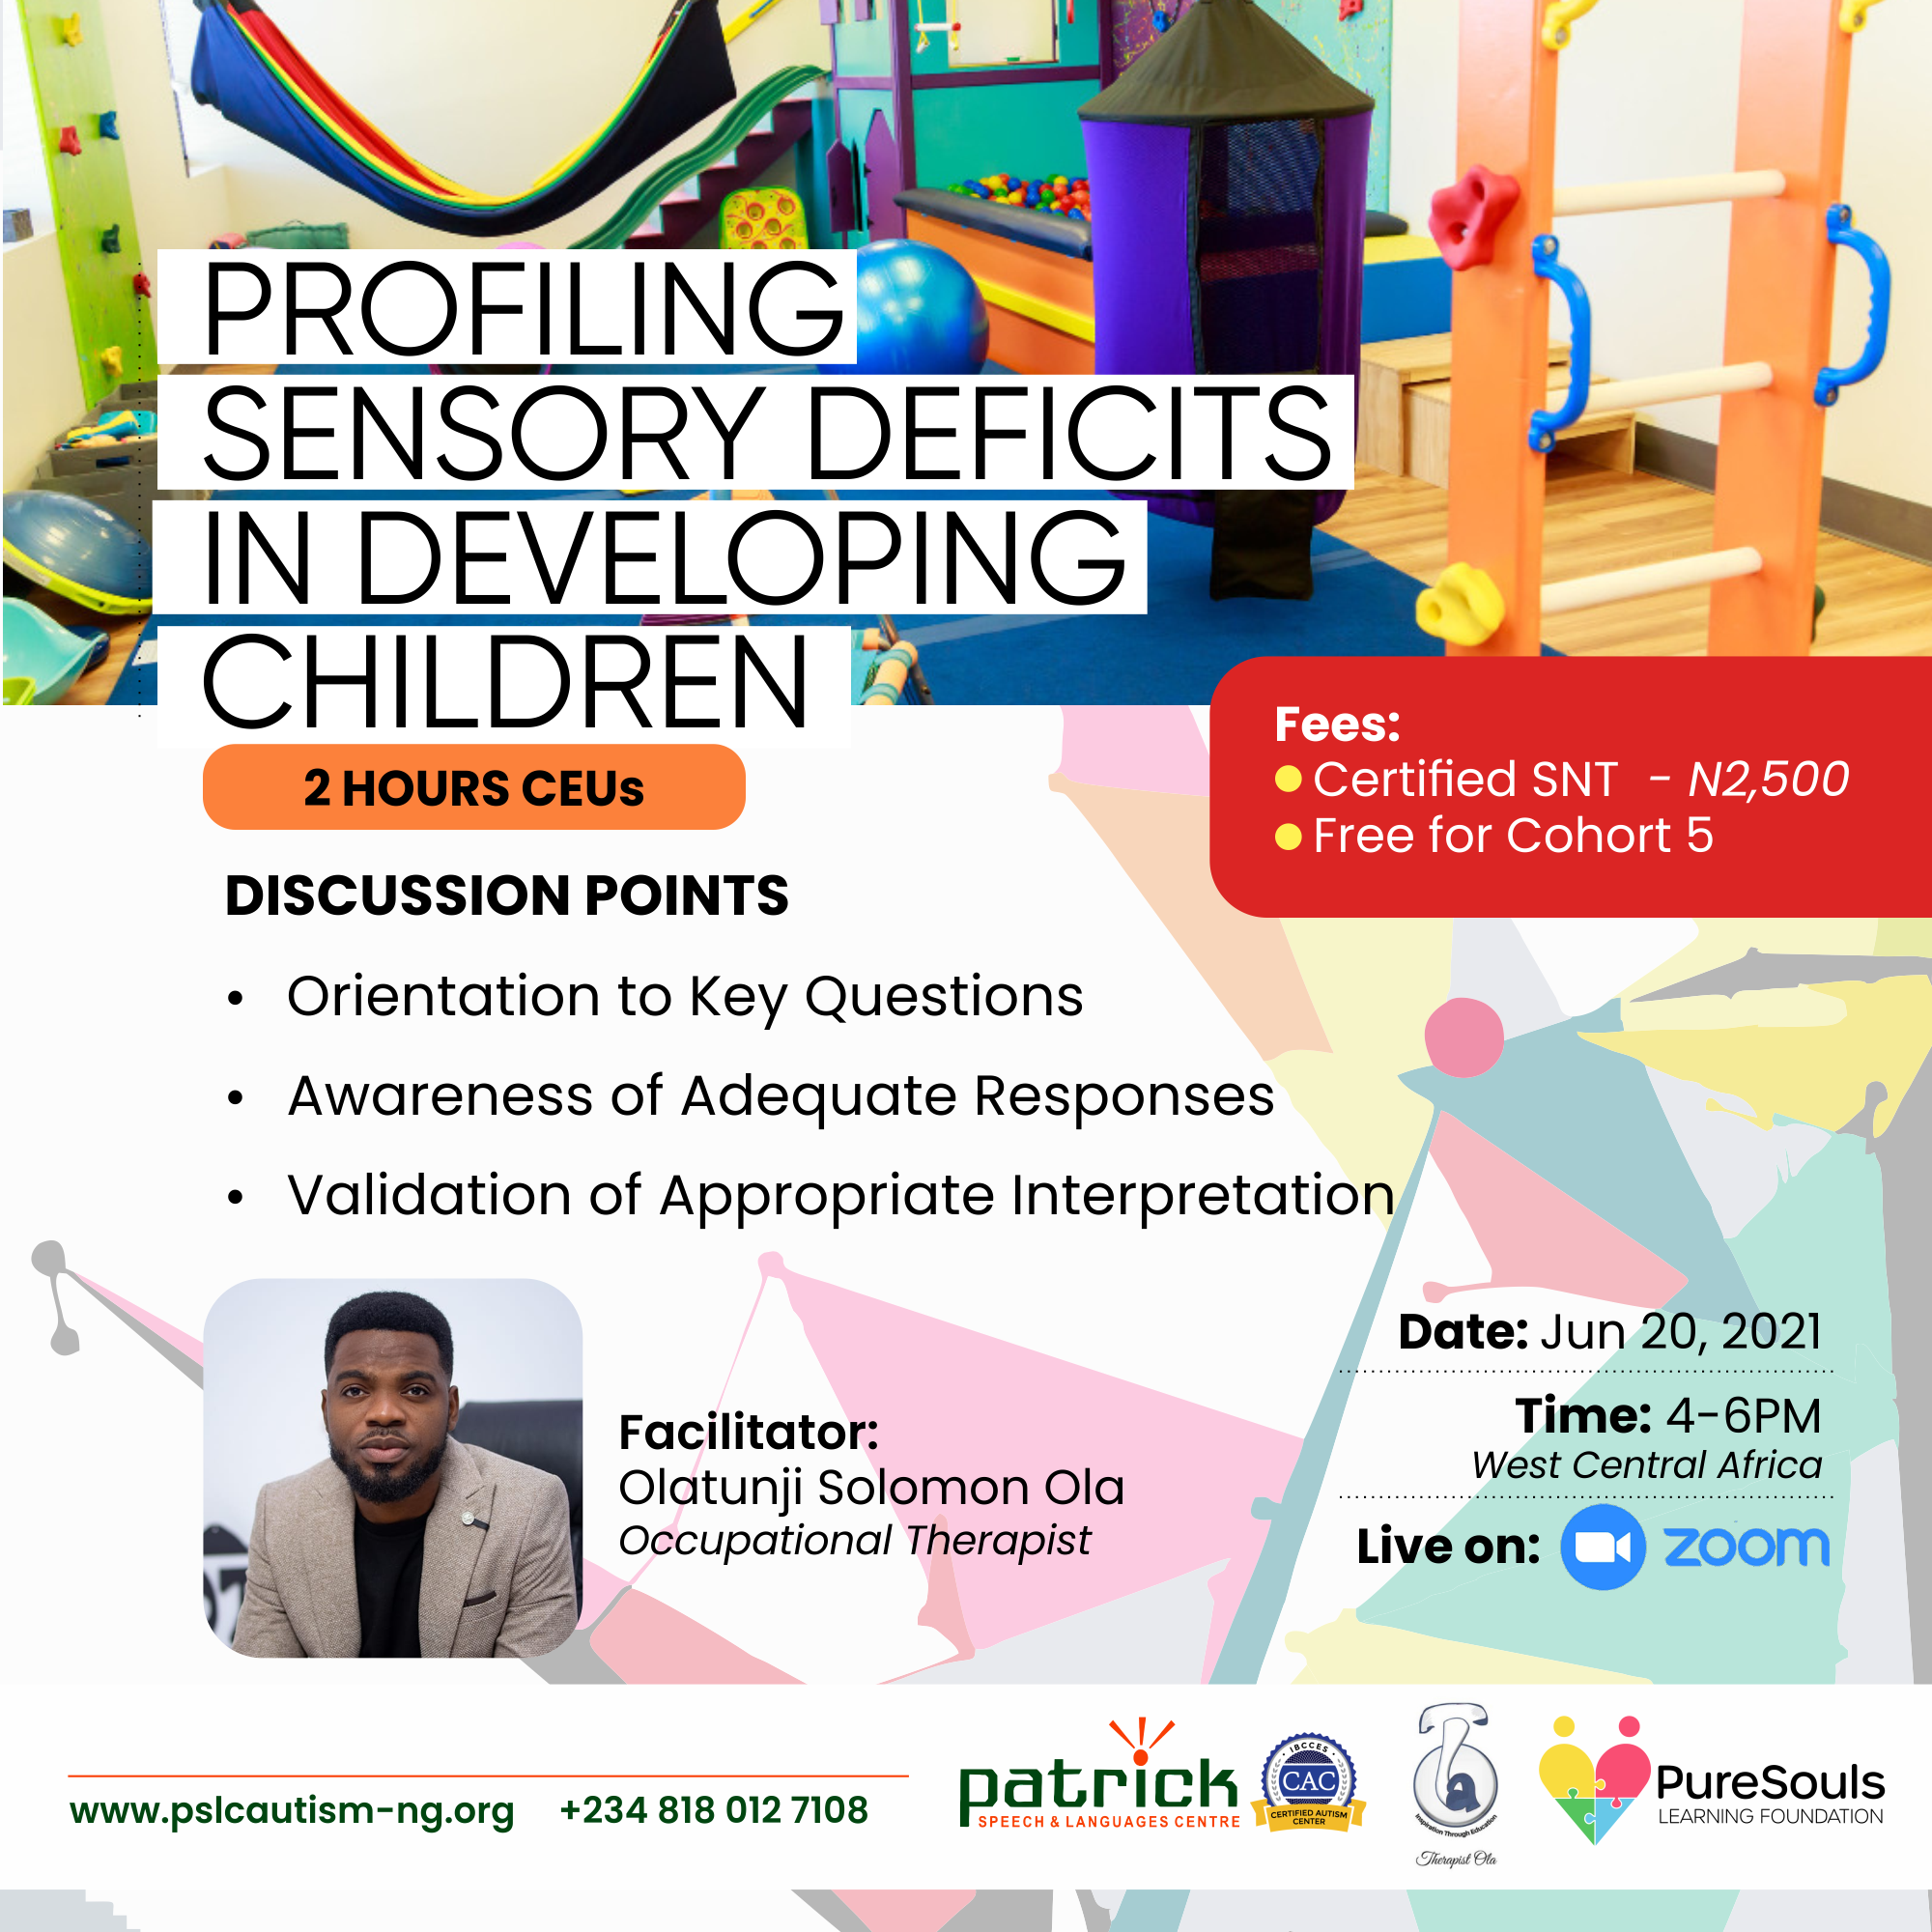 Profiling Sensory Deficits In Developing Children